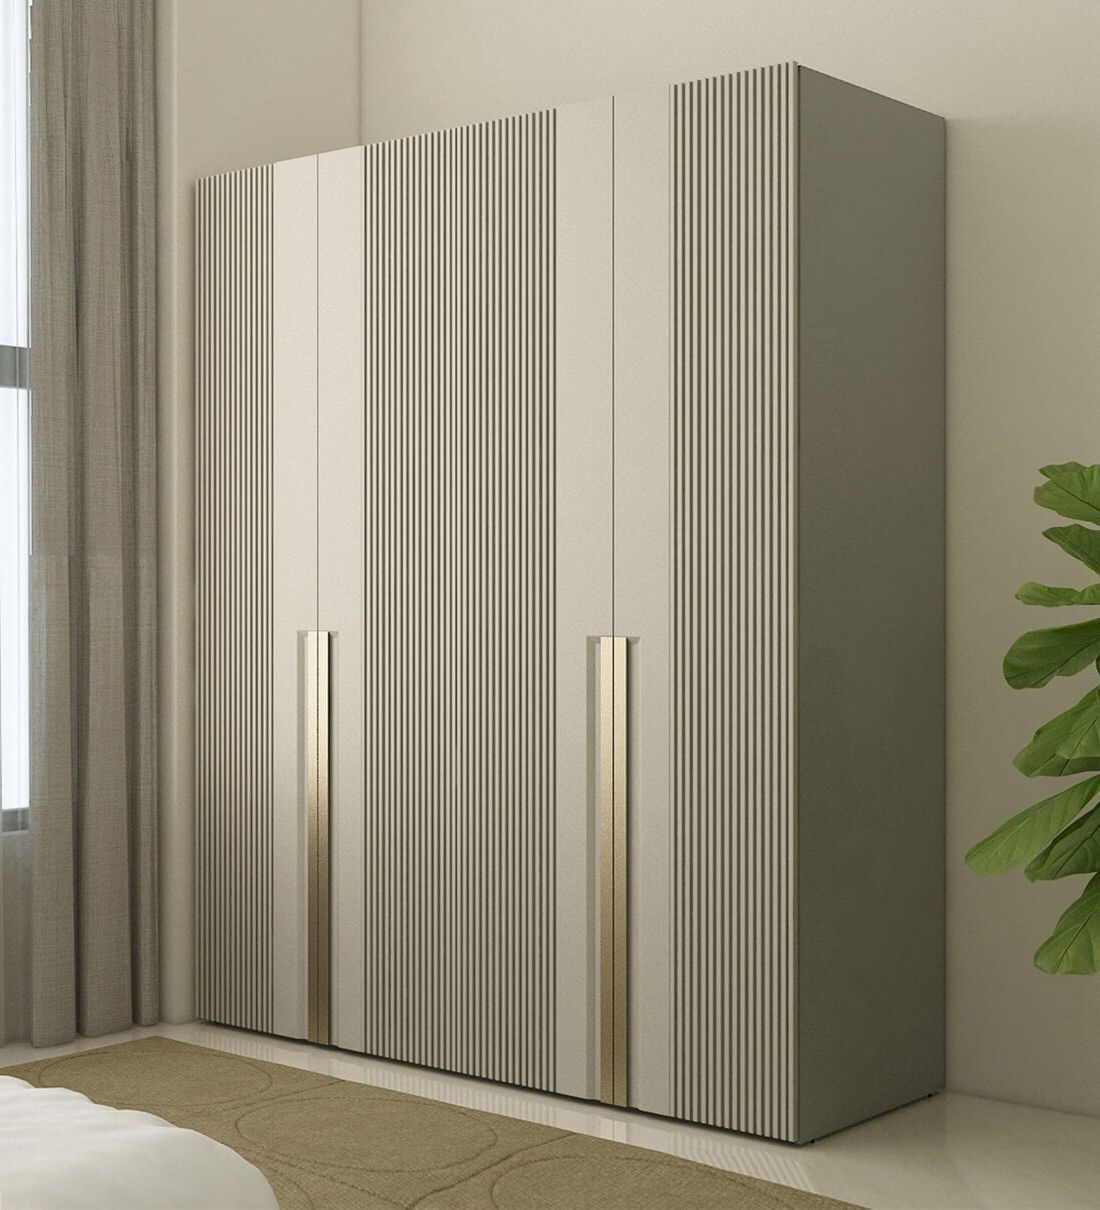 Buy Astor Modern 4 Door Wardrobe In Cashmere Colour With Stripes At 26% Off Spacewood | Pepperfry Pertaining To Cheap 4 Door Wardrobes (View 8 of 20)